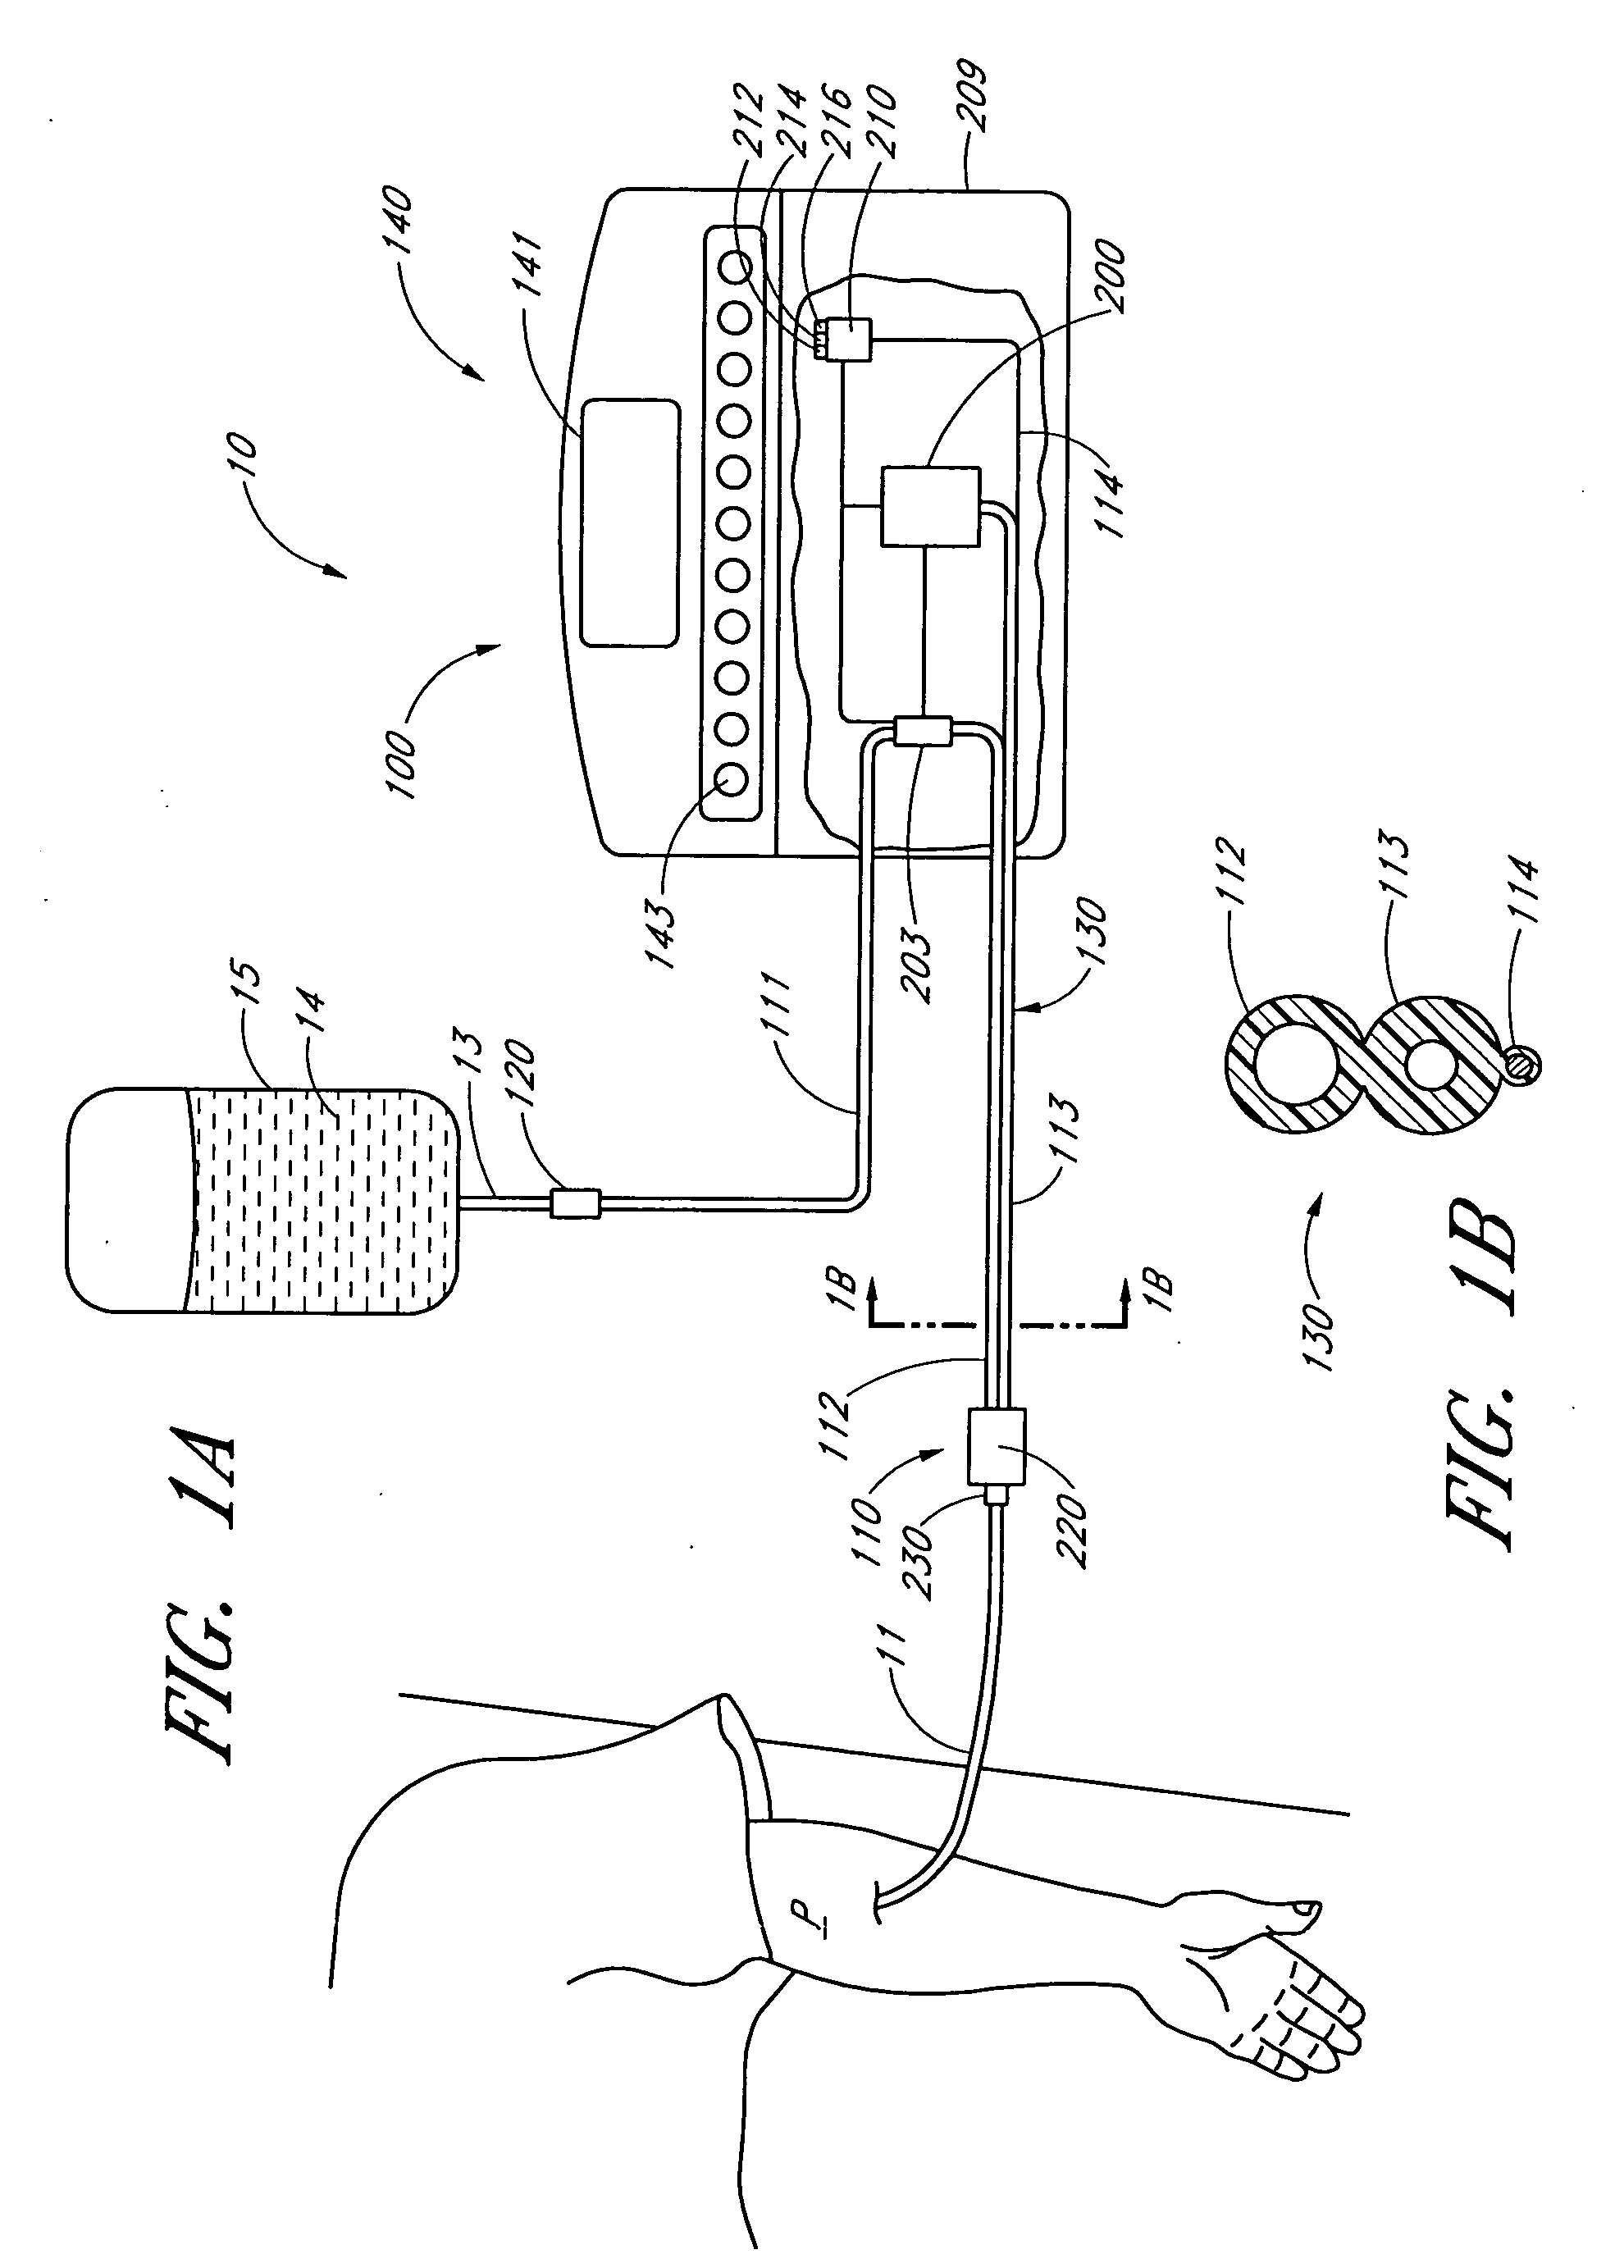 Method and apparatus for calibrating an analyte detection system with a calibration sample